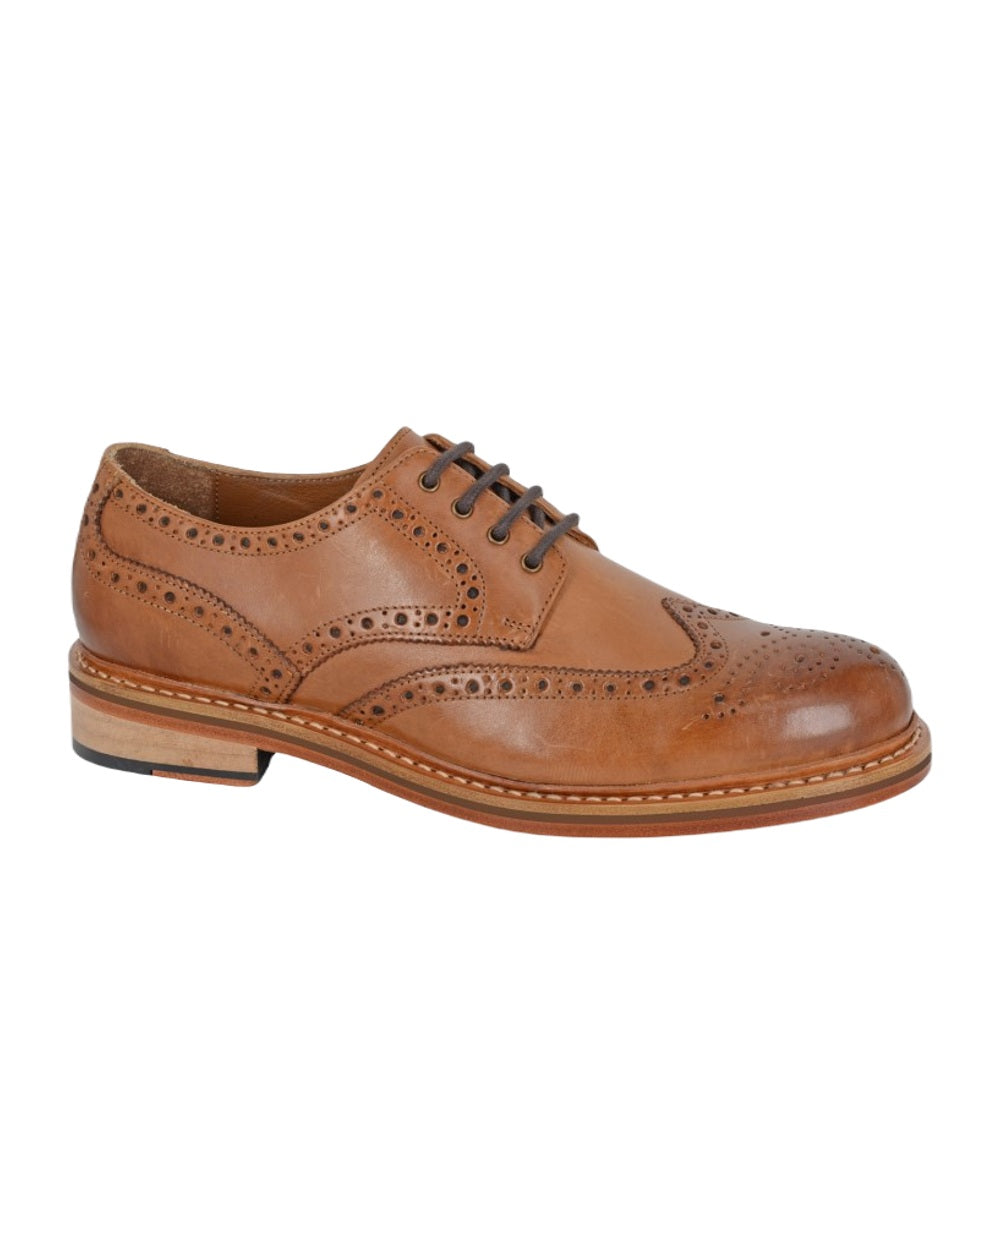 Woodland Leather Brogue Gibson Shoes | Leather Sole In Tan